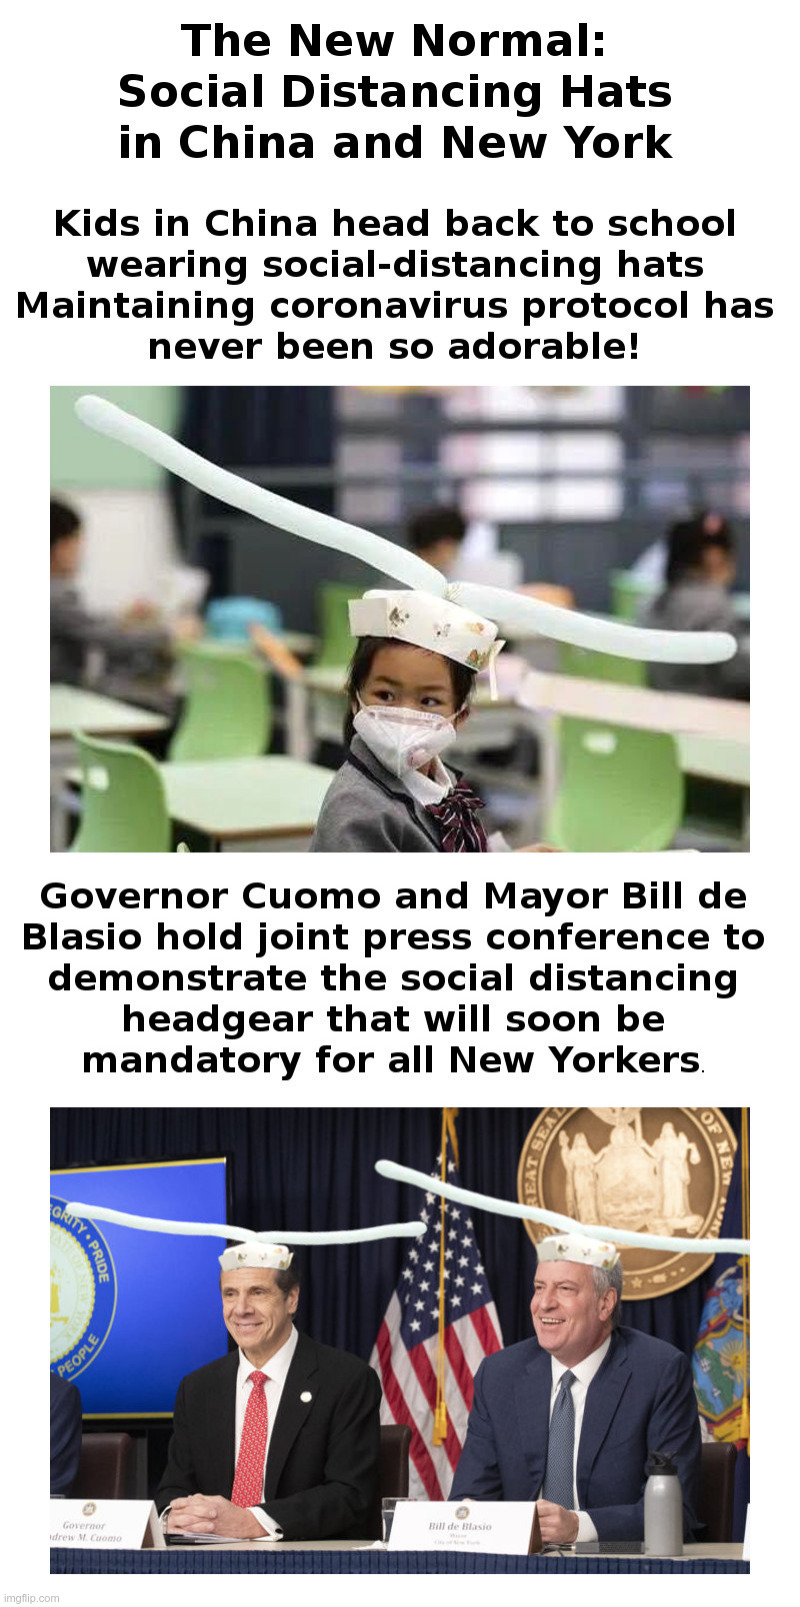 The New Normal: Social Distancing Hats in China and New York | image tagged in china,new york,hats,andrew cuomo,deblasio,coronavirus | made w/ Imgflip meme maker